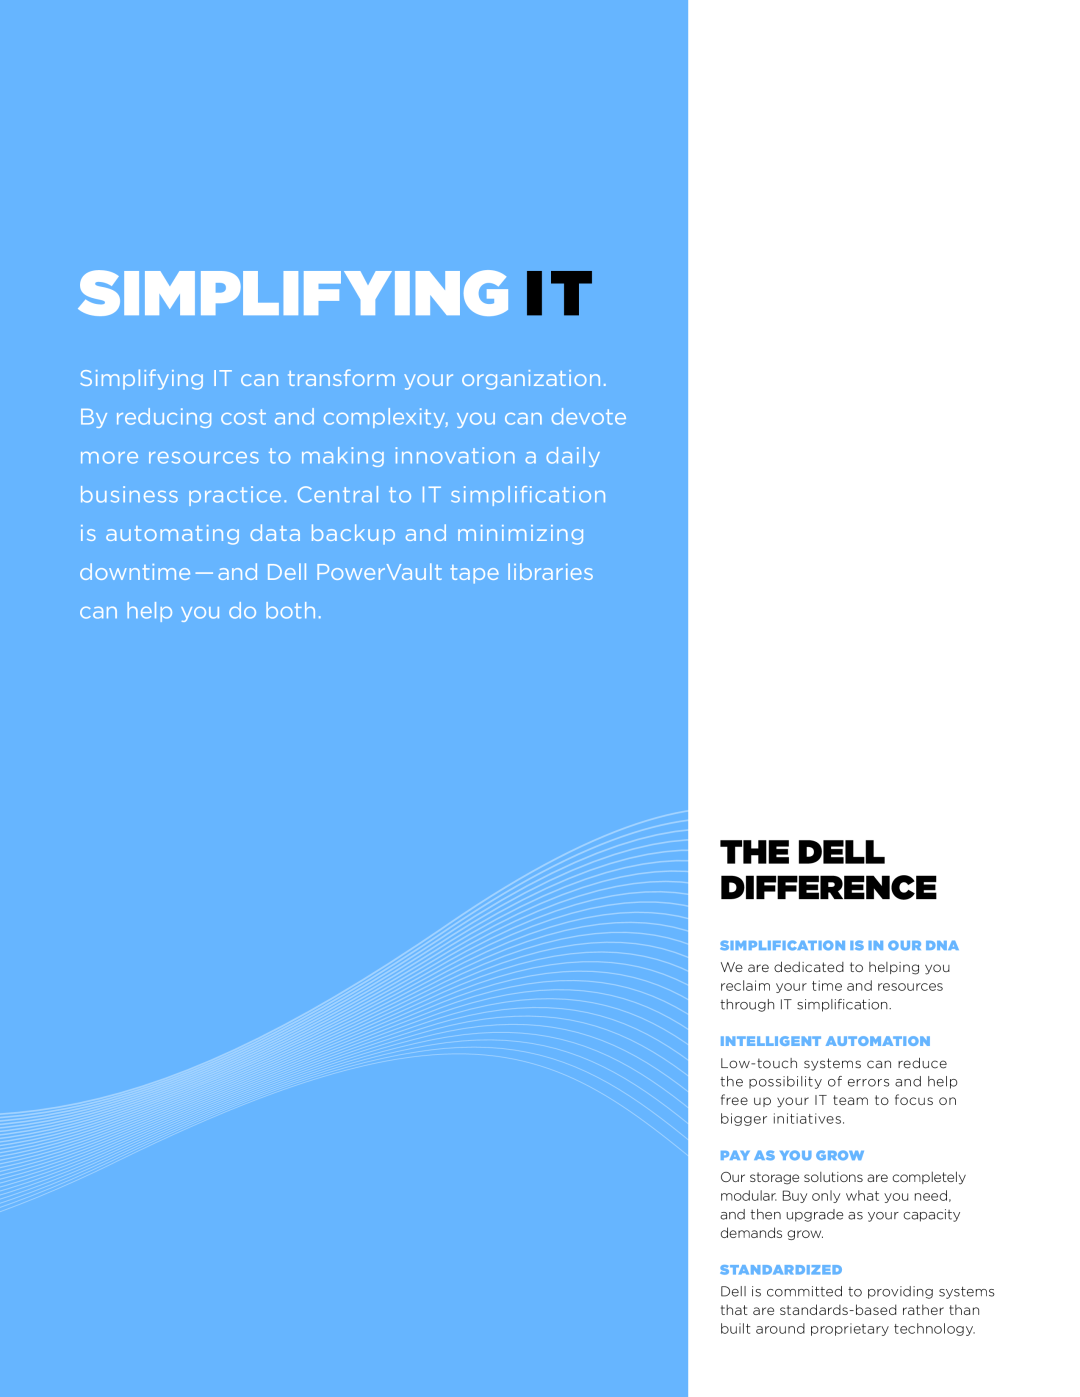 Dell TL2000, TL4000 manual the dell difference, Simplifying IT 